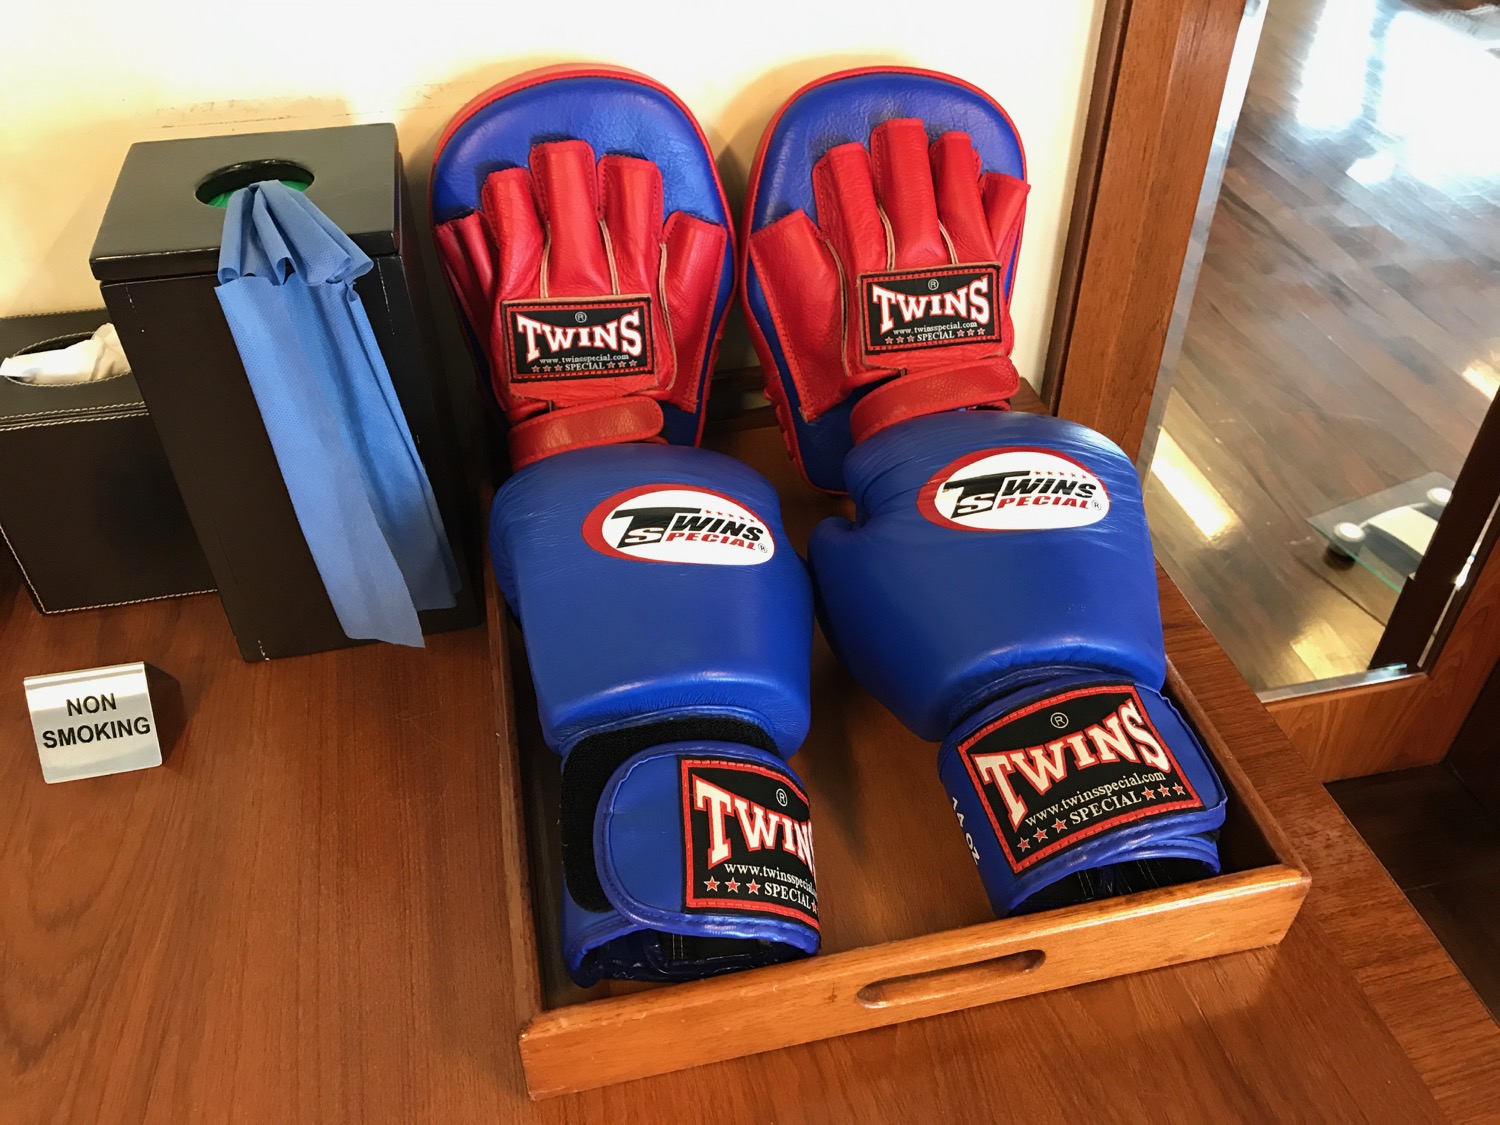 a pair of boxing gloves on a tray